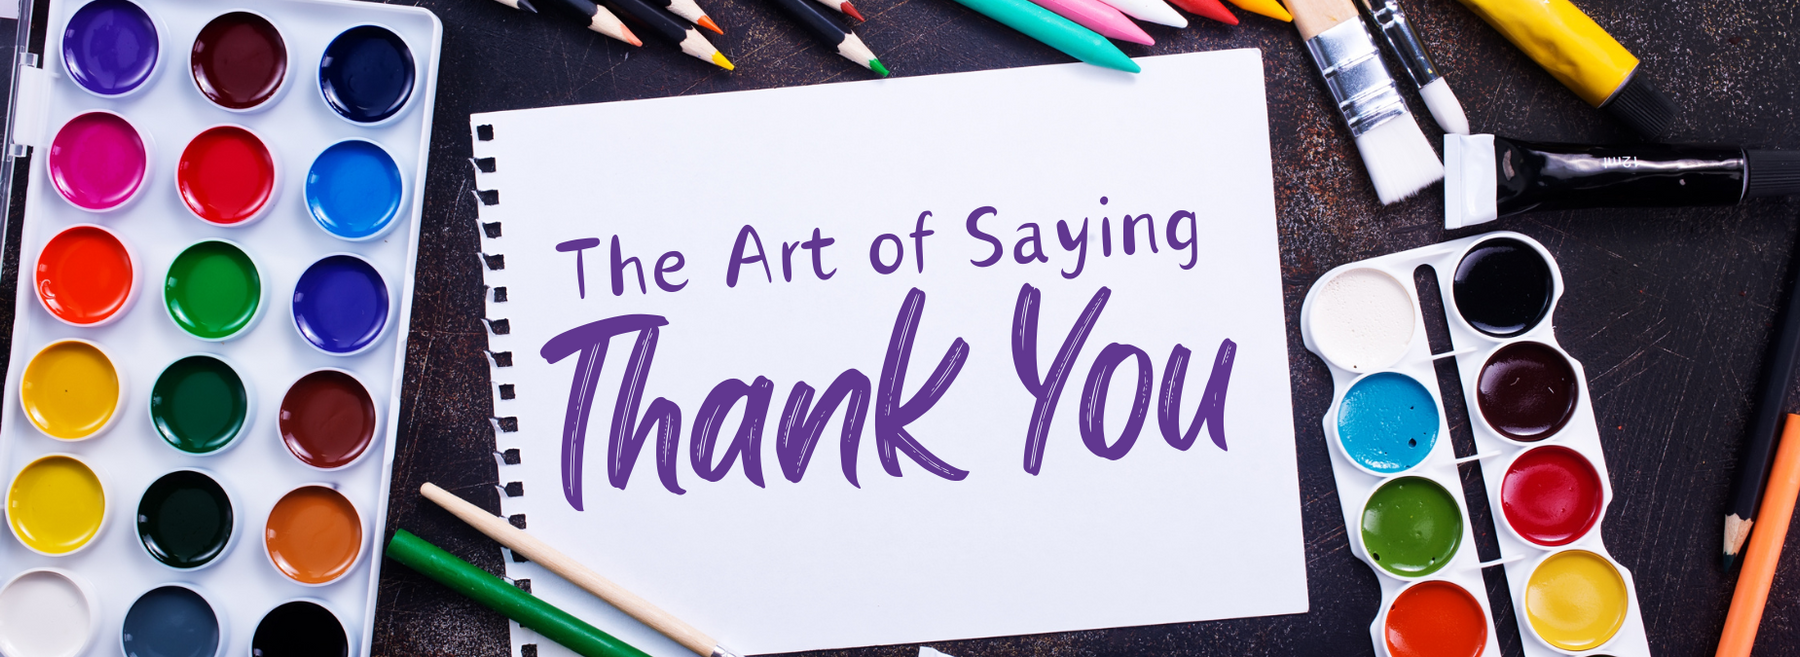 The Art of Saying Thank You